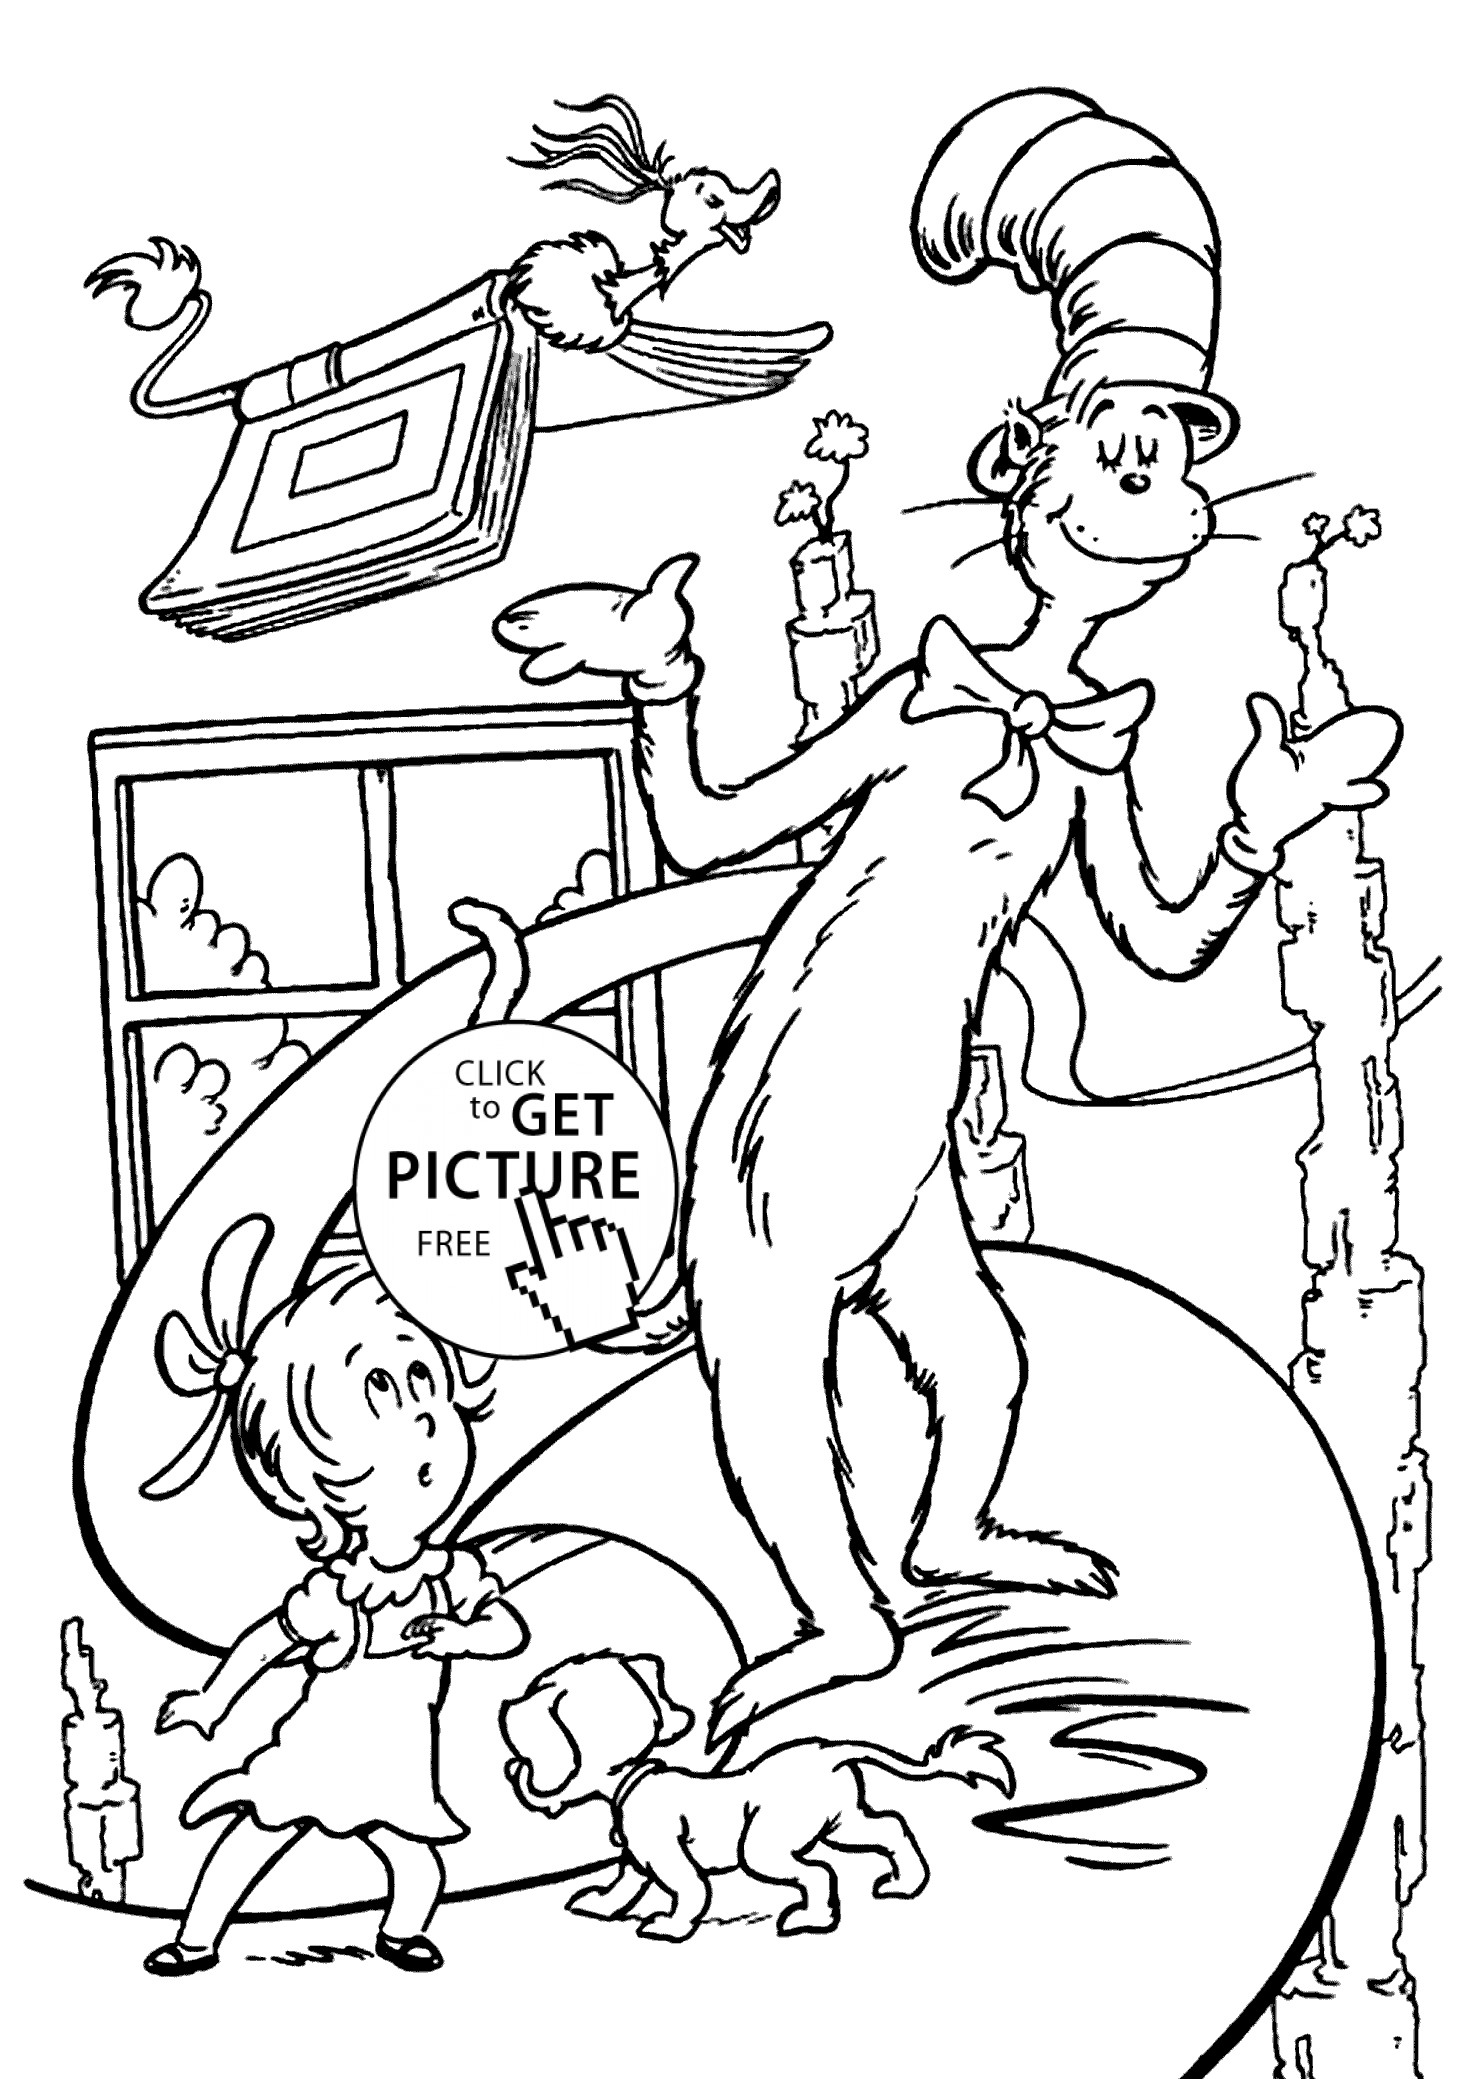 Dr.Seuss Coloring Pages Printable
 Funny Сat in the hat coloring pages for kids printable